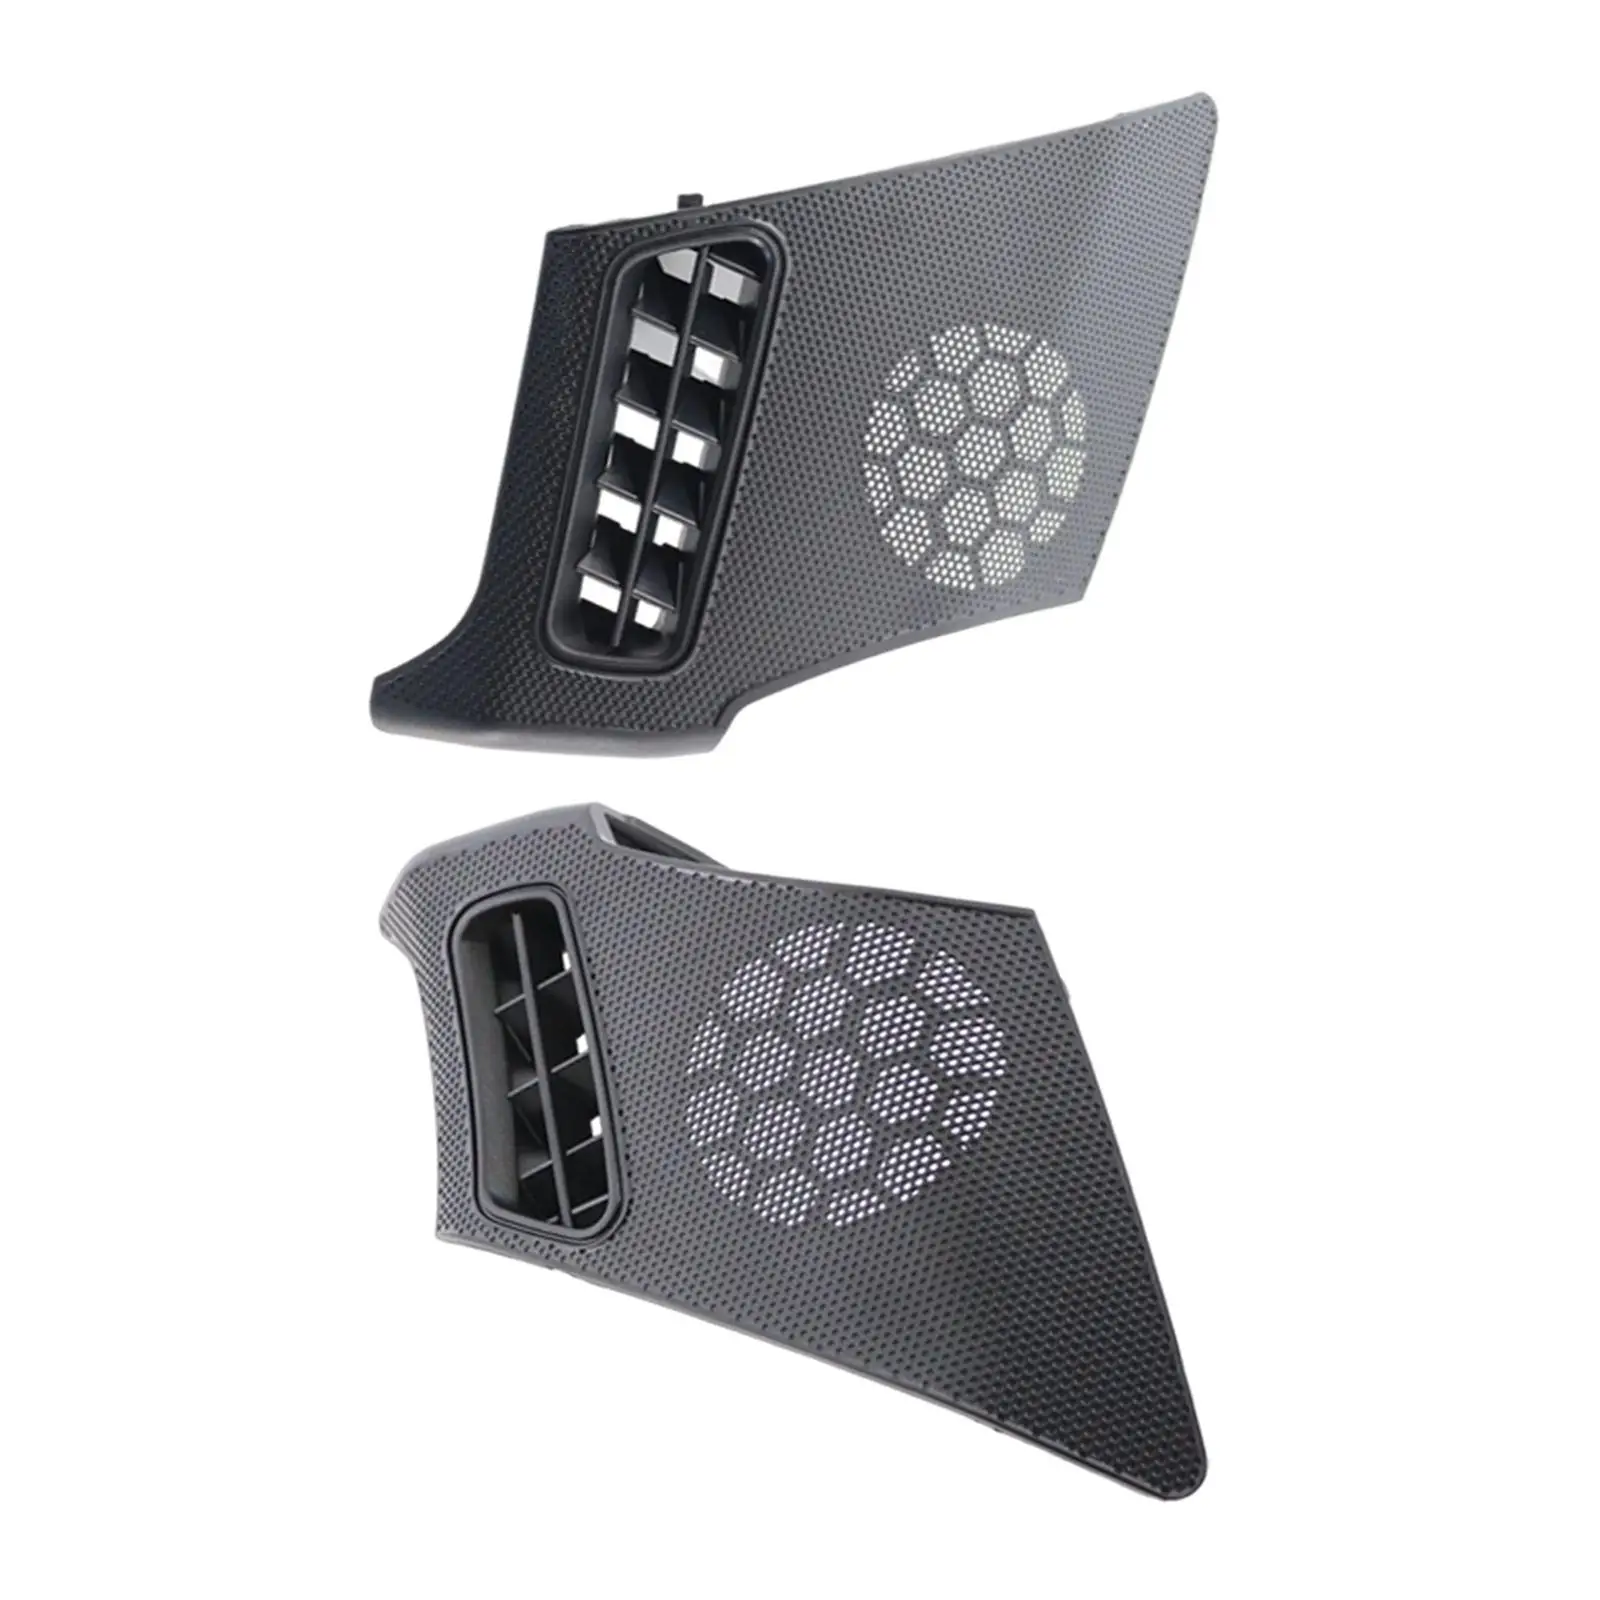  Board Air Vent  Grill Covers Decorative Protective Durable